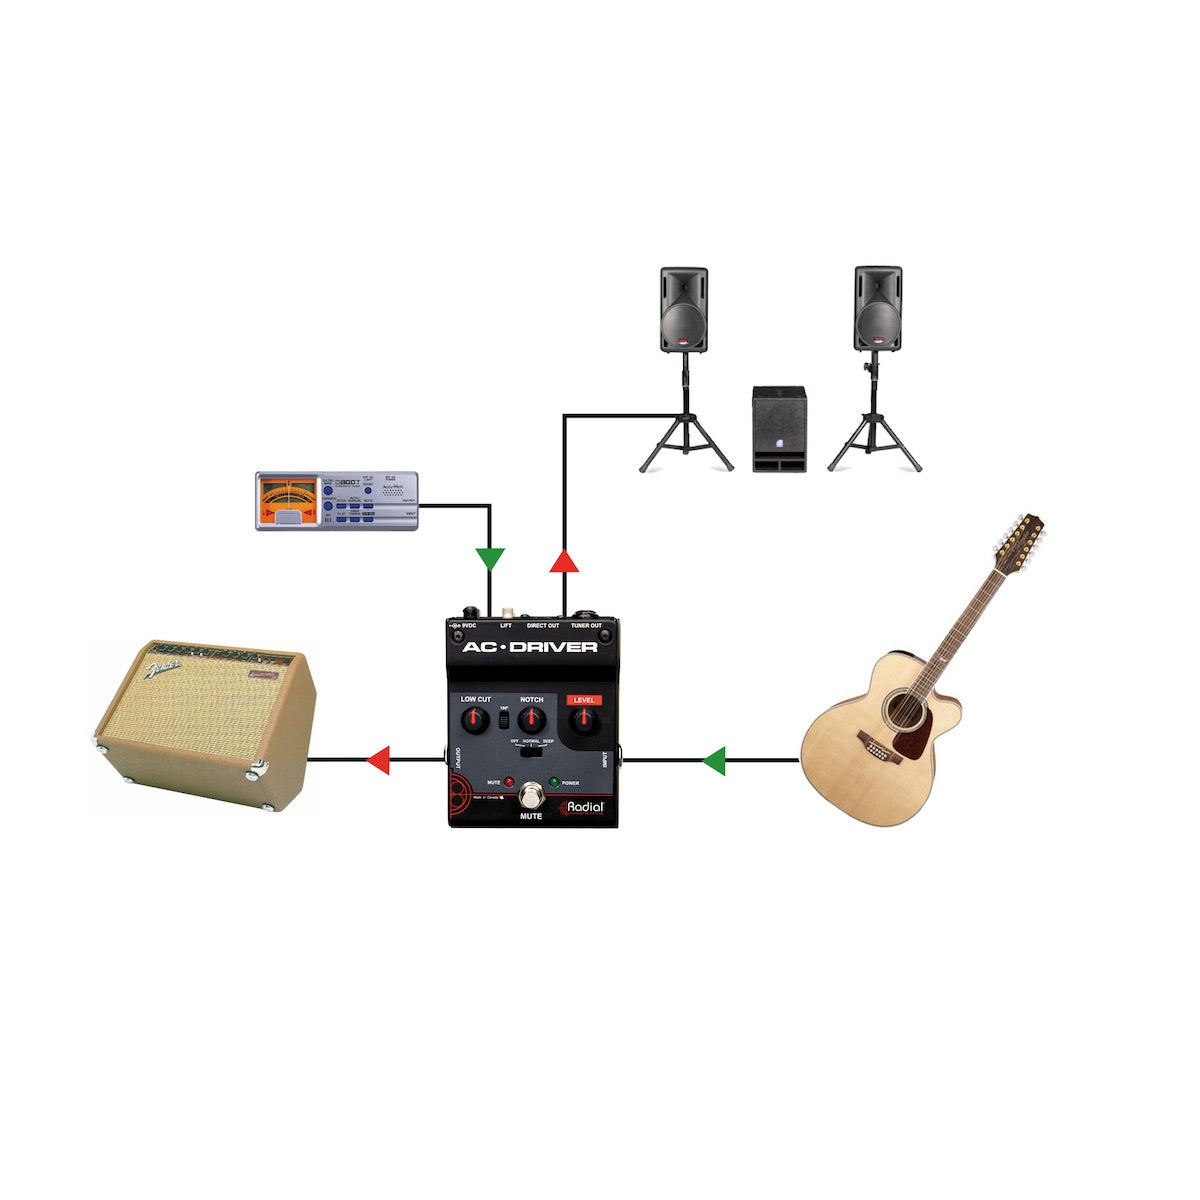 Radial AC-Driver - Acoustic Instrument Preamp, application diagram